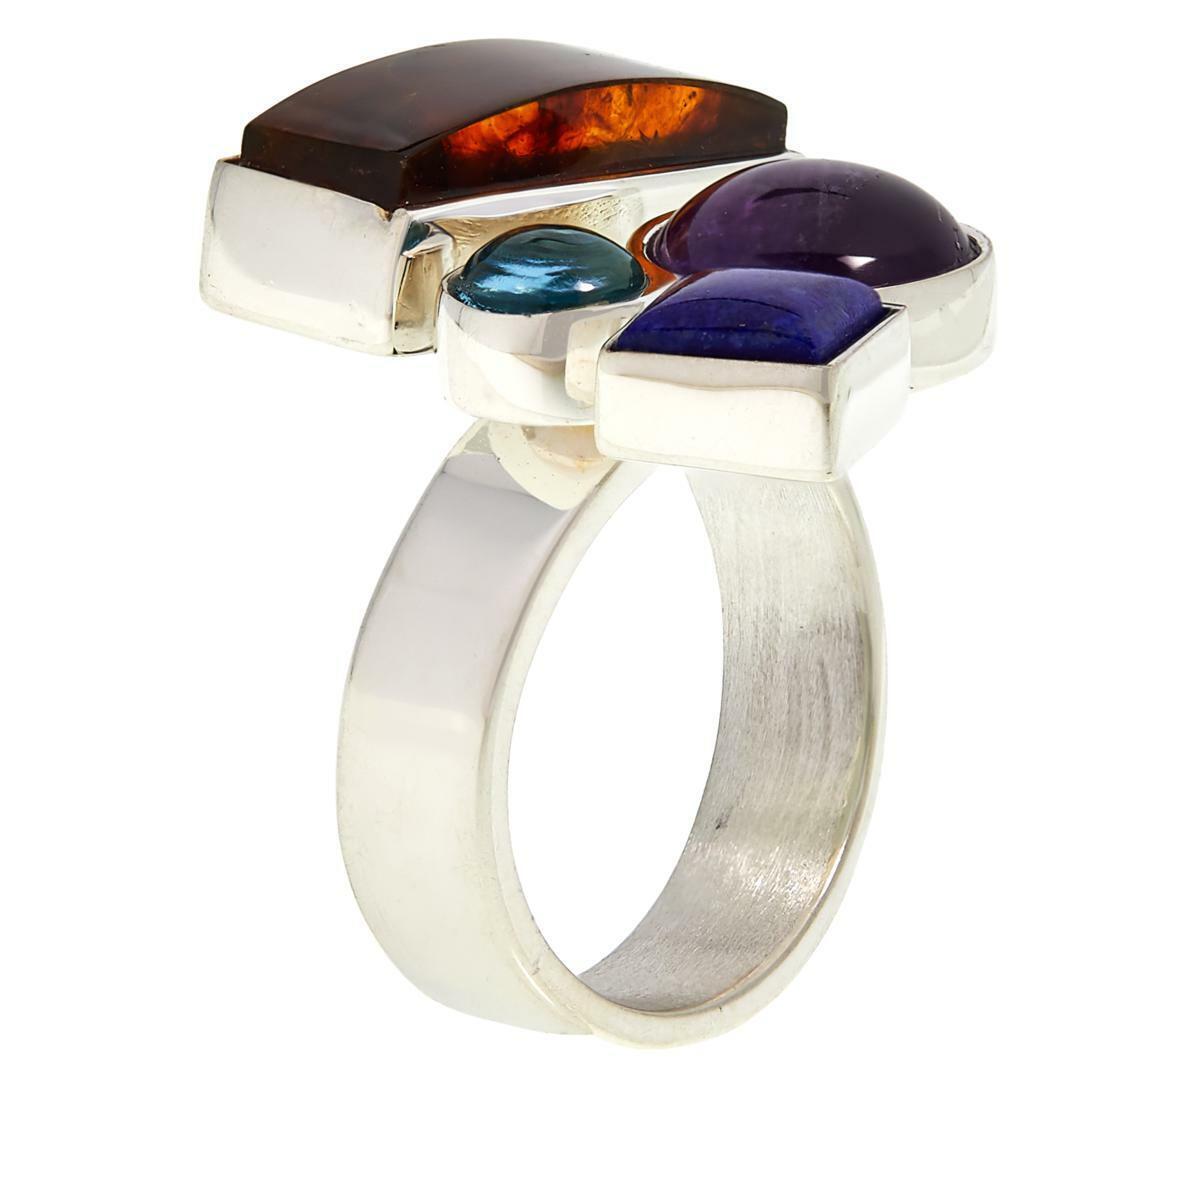 Jay King Gallery Collection Sterling Silver Multi-Color Multi-Gem Ring, Size 7